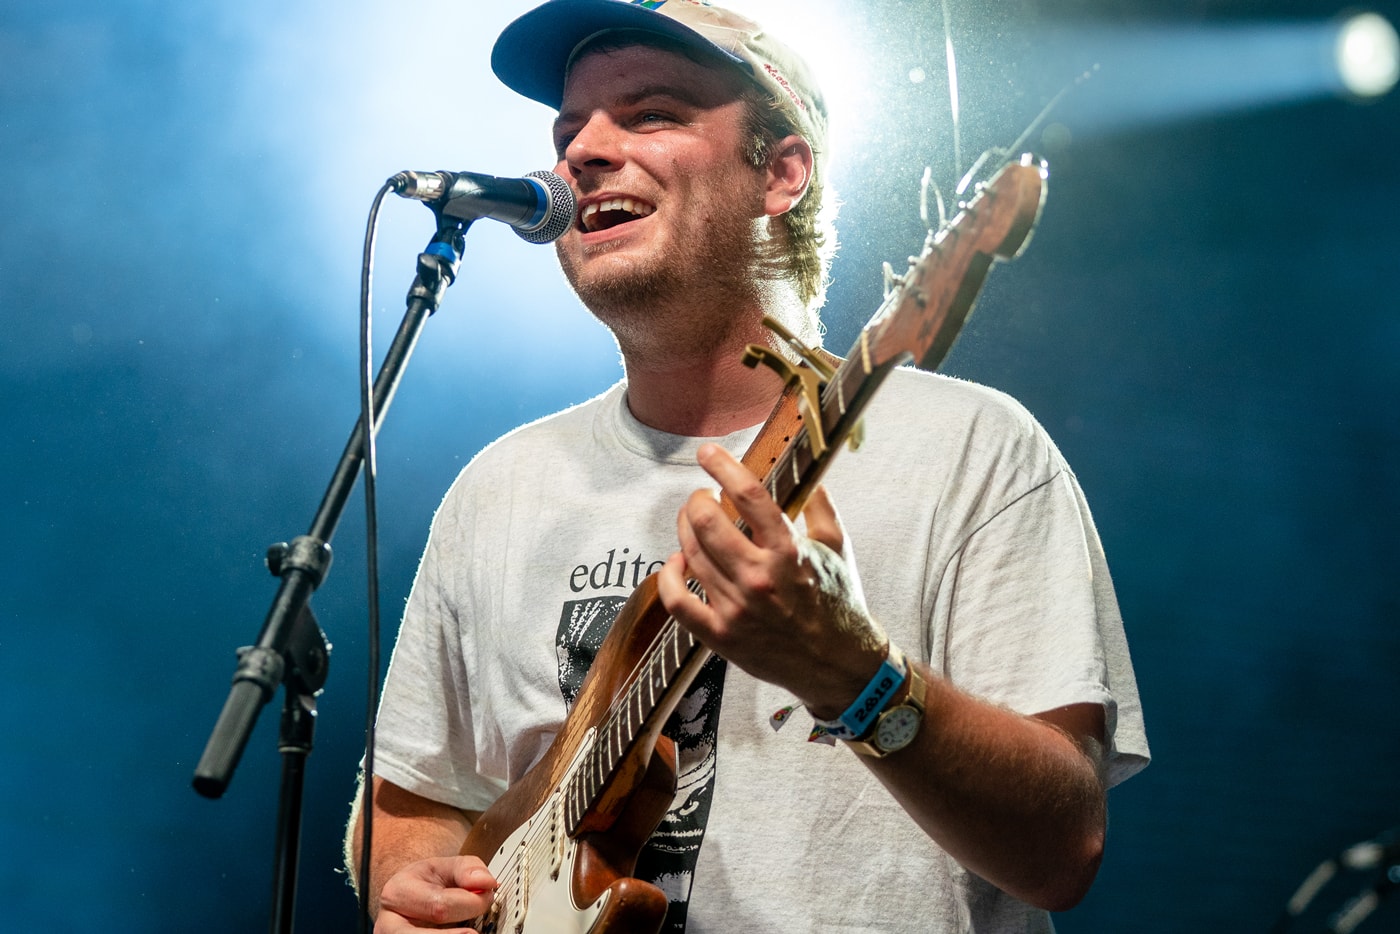 Mac DeMarco Unveils Two New Demo Albums Here Comes the Cowboy Demos Other music indie independant lp compilations collection nobody finally alone choo choo song singles